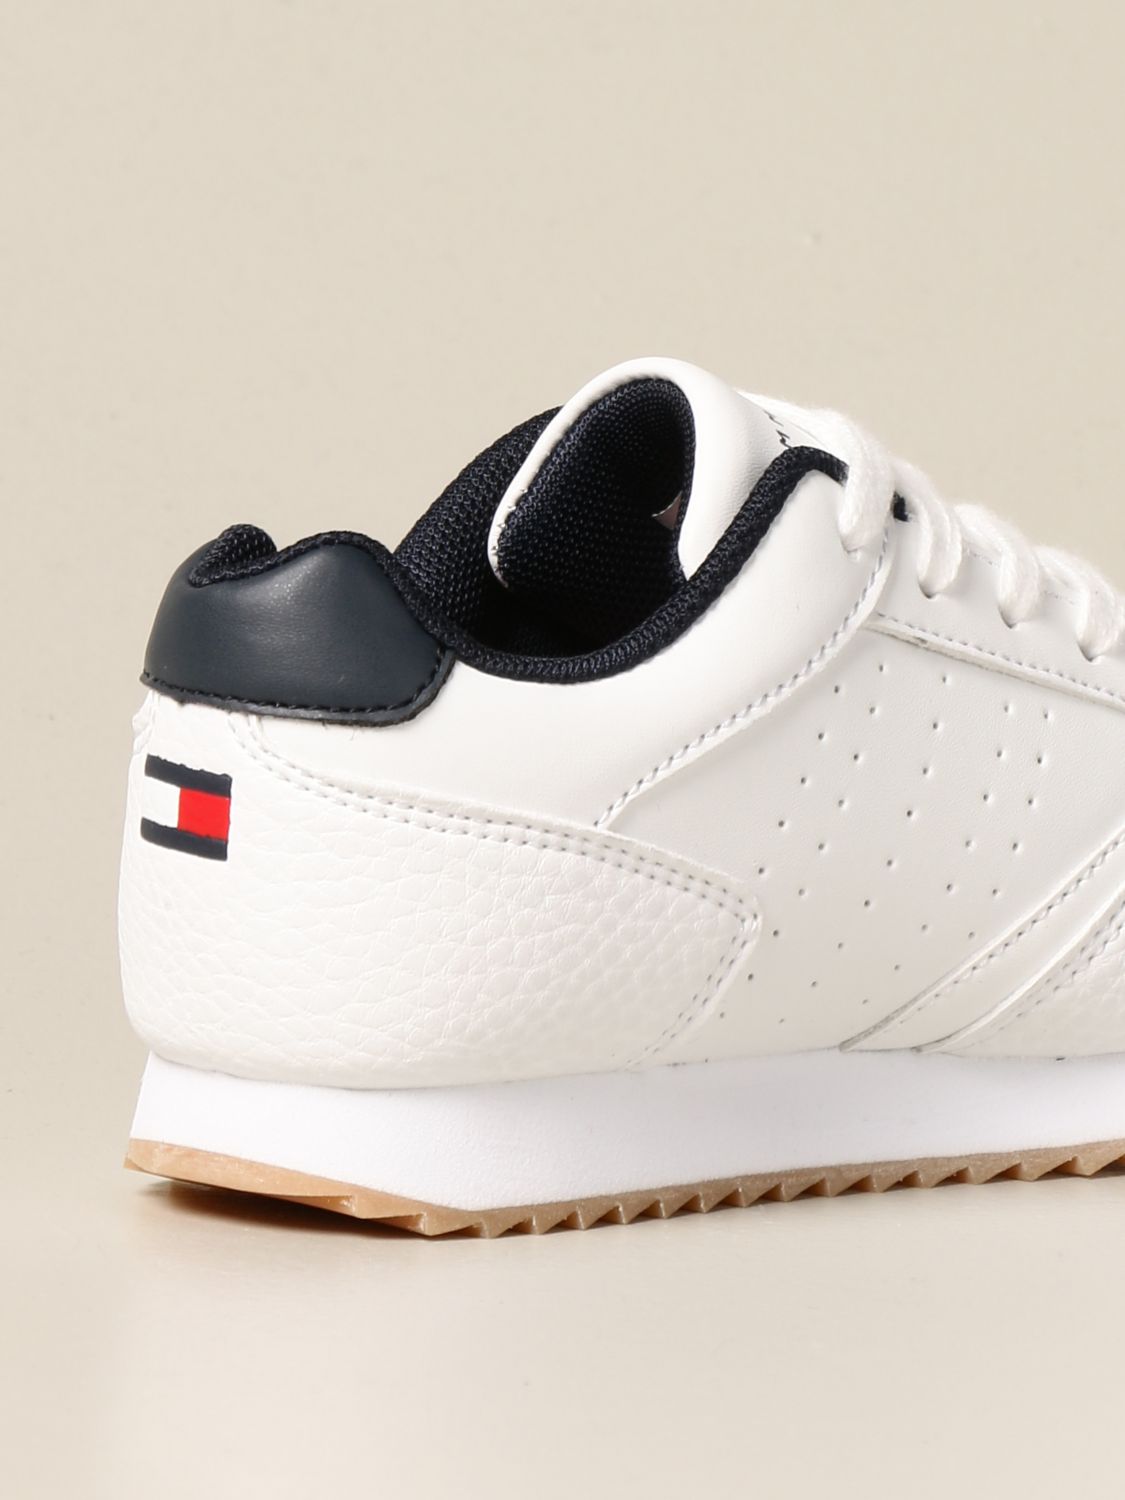 Tommy Hilfiger Chaussures Enfant Chaussures Tommy Hilfiger Enfant Blanc Chaussures Tommy Hilfiger T3b4 0621 Giglio Fr